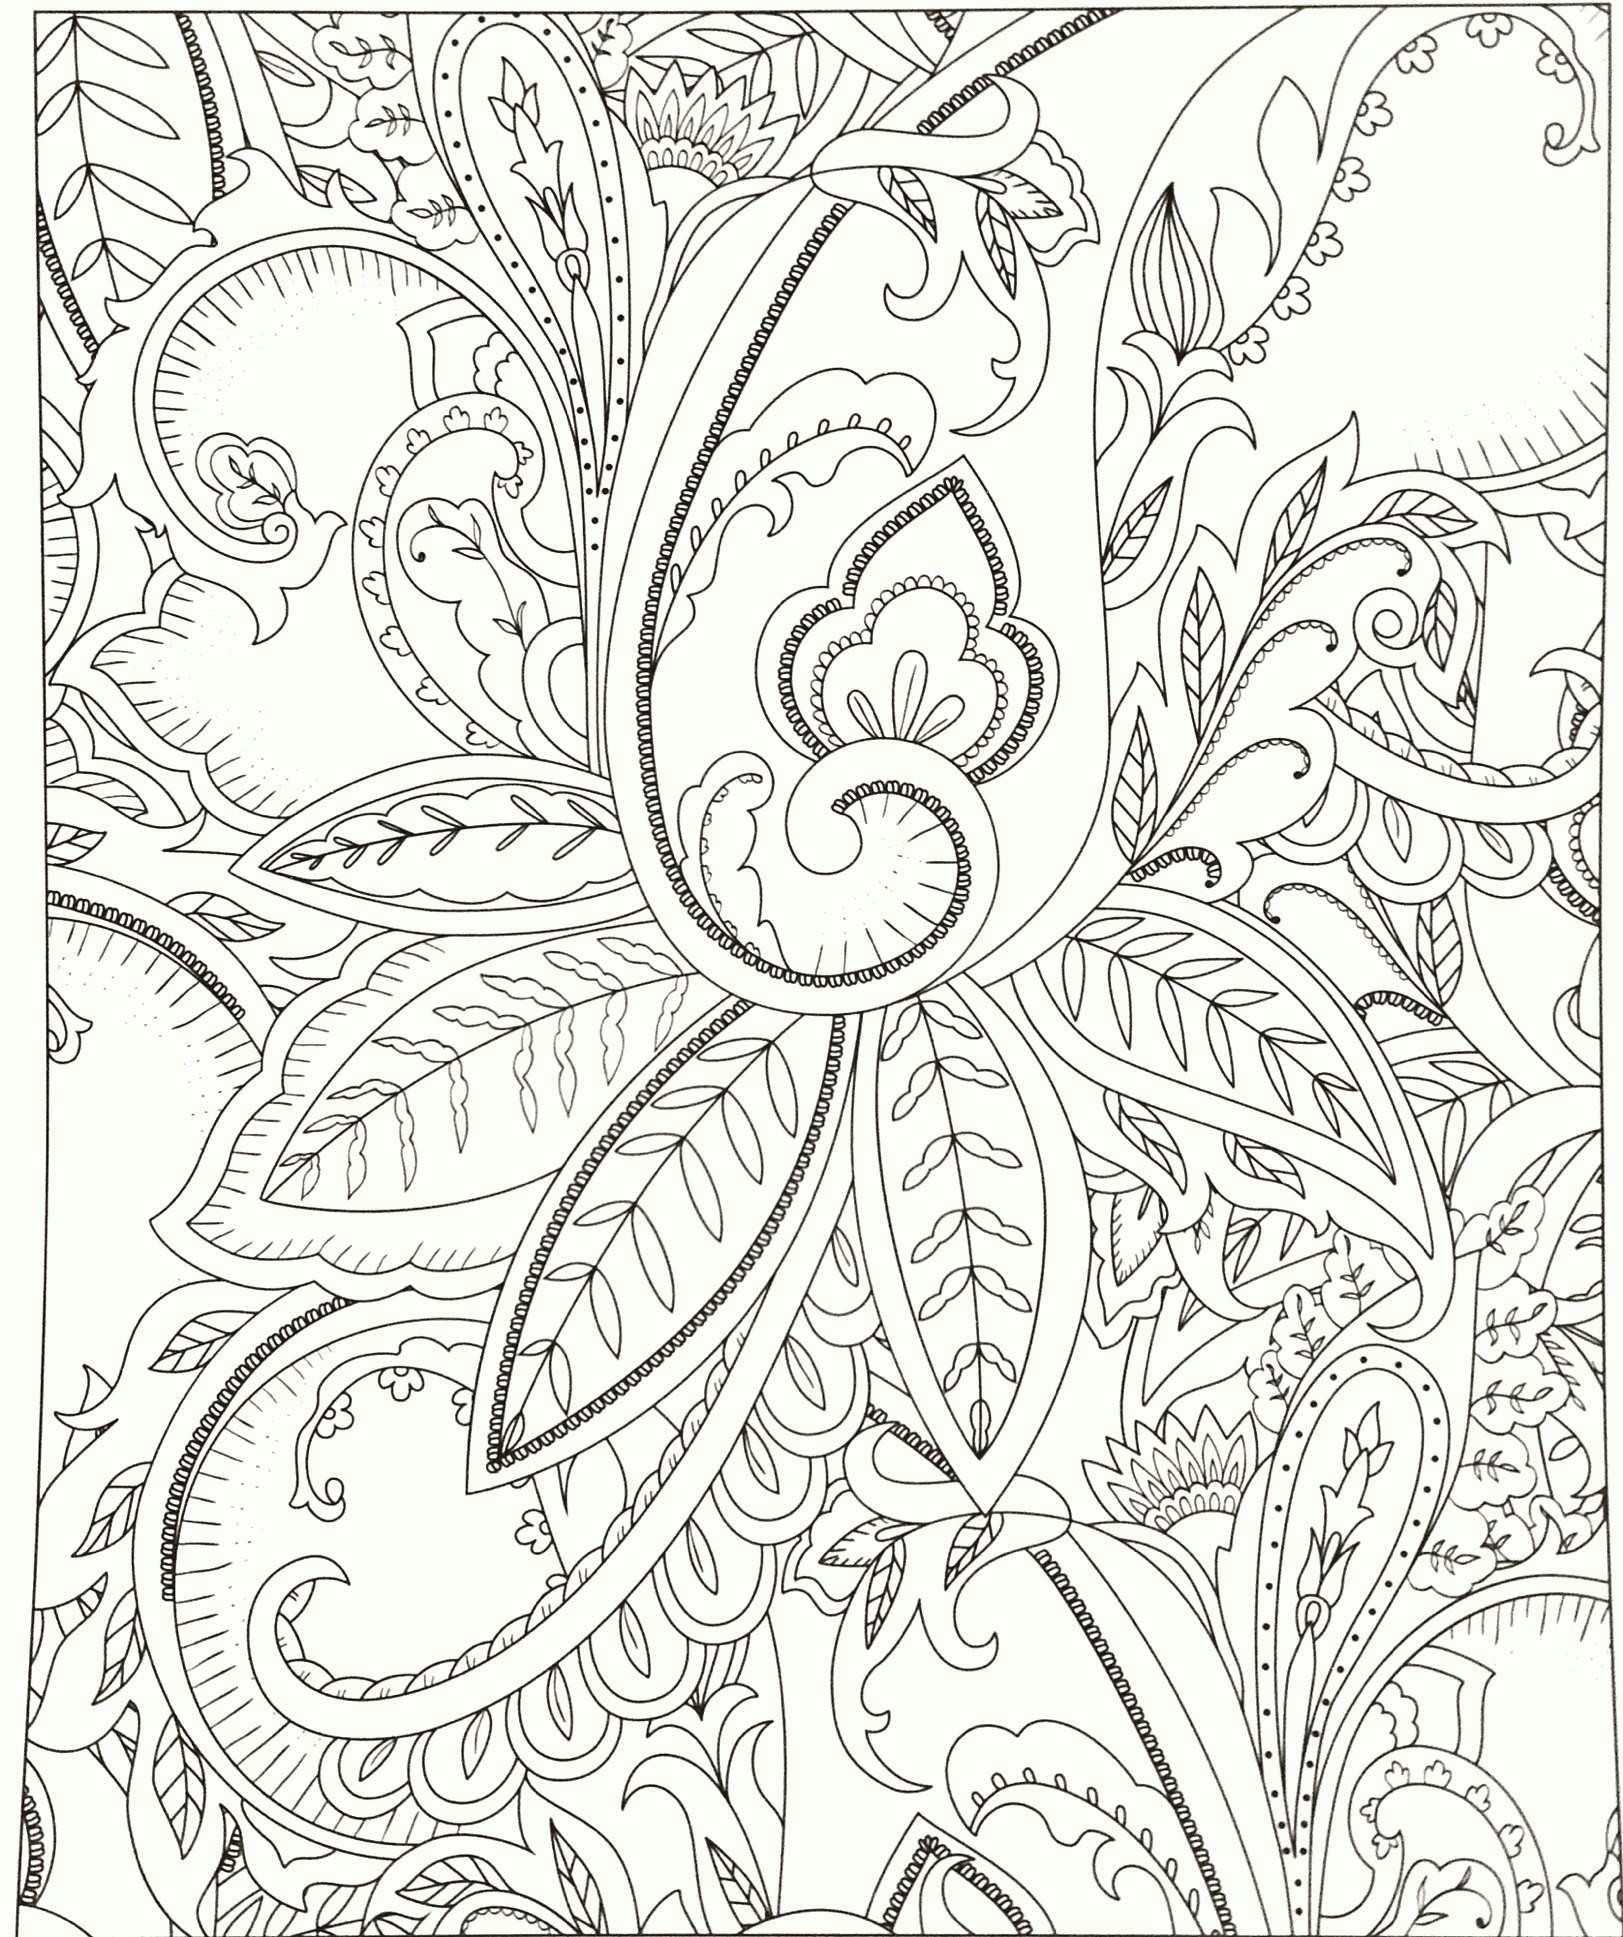 letter q coloring page elegant coloring pages the word peace lovely printable cds 0d fun